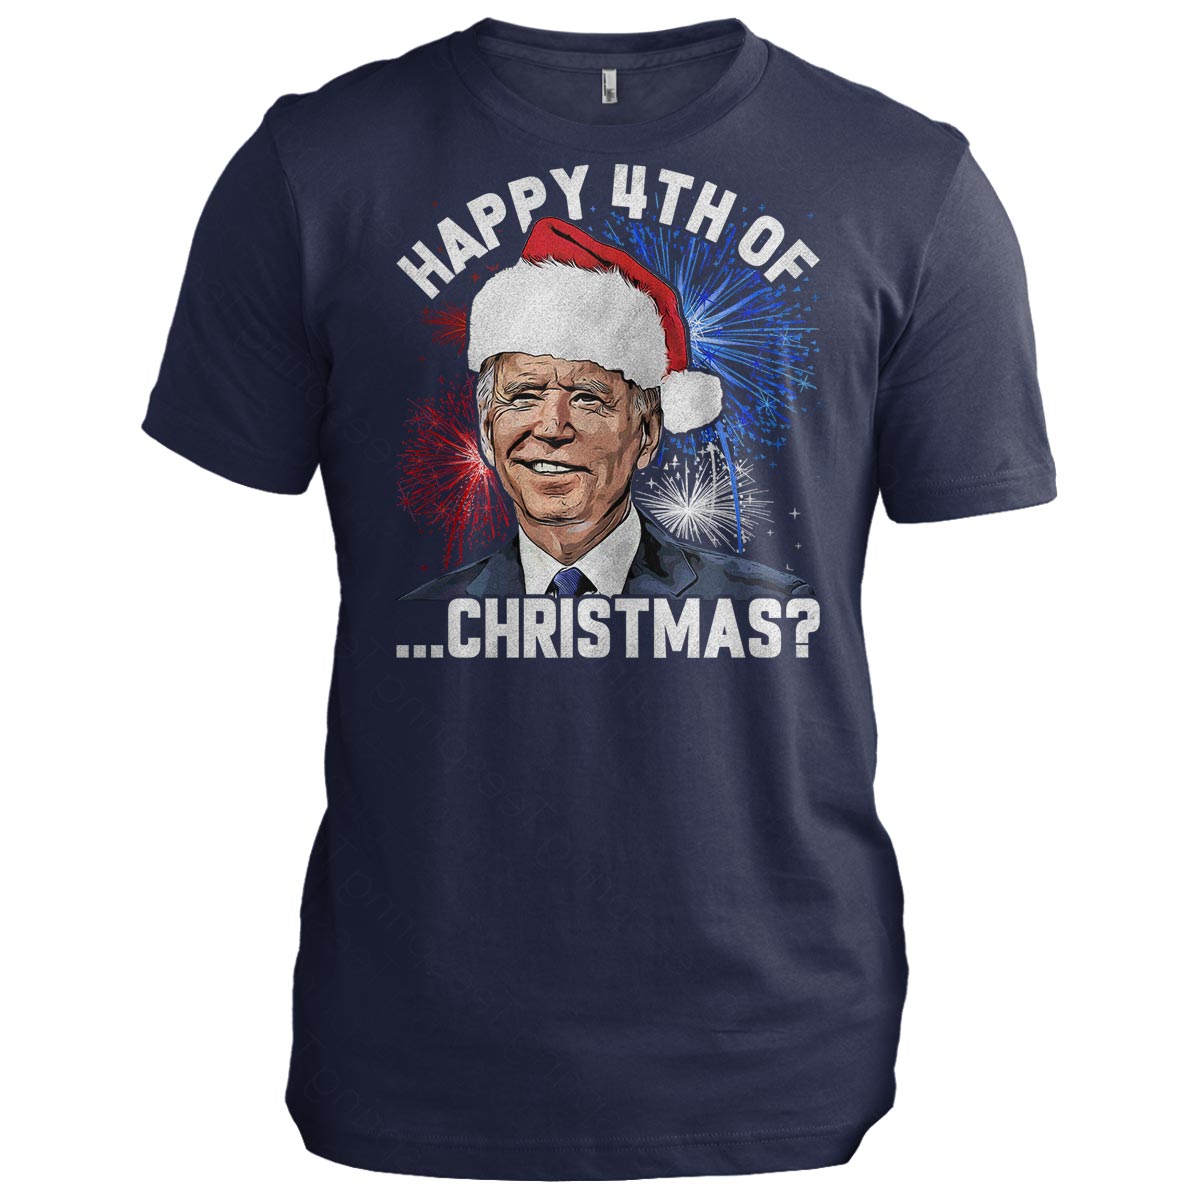 Happy 4th of Christmas